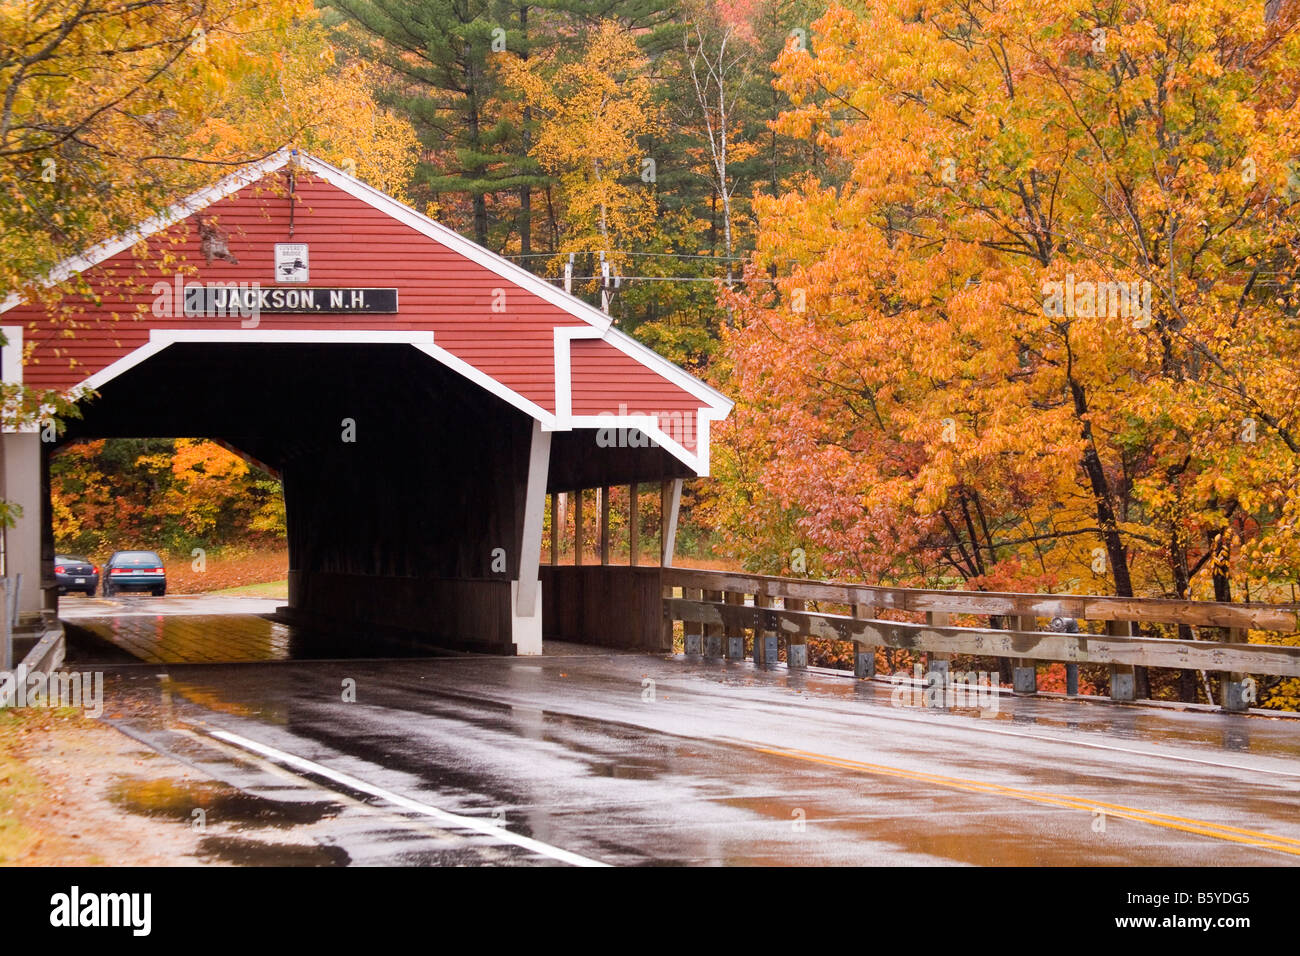 A covered bridge in Jackson, New Hampshire, surrounded by colorful autumn foliage. Stock Photo